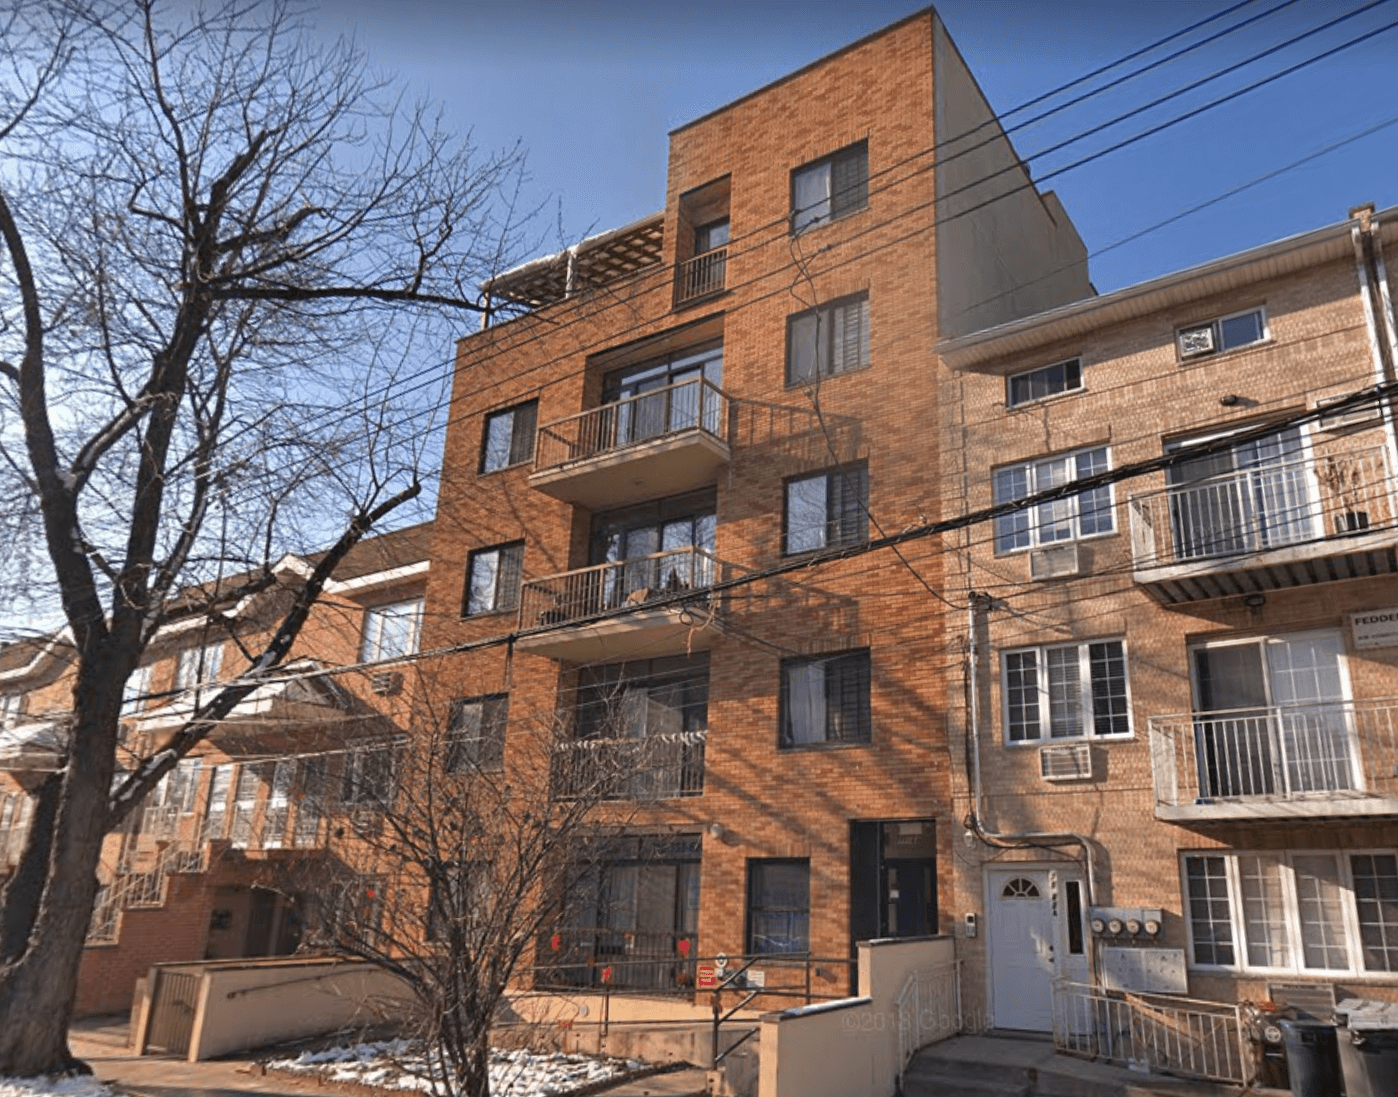 The apartment house on 160th Street in Fresh Meadows previously owned by Ram and Elhad Cohen, whom Attorney General Barbara Underwood accused of tax evasion on Oct. 23.